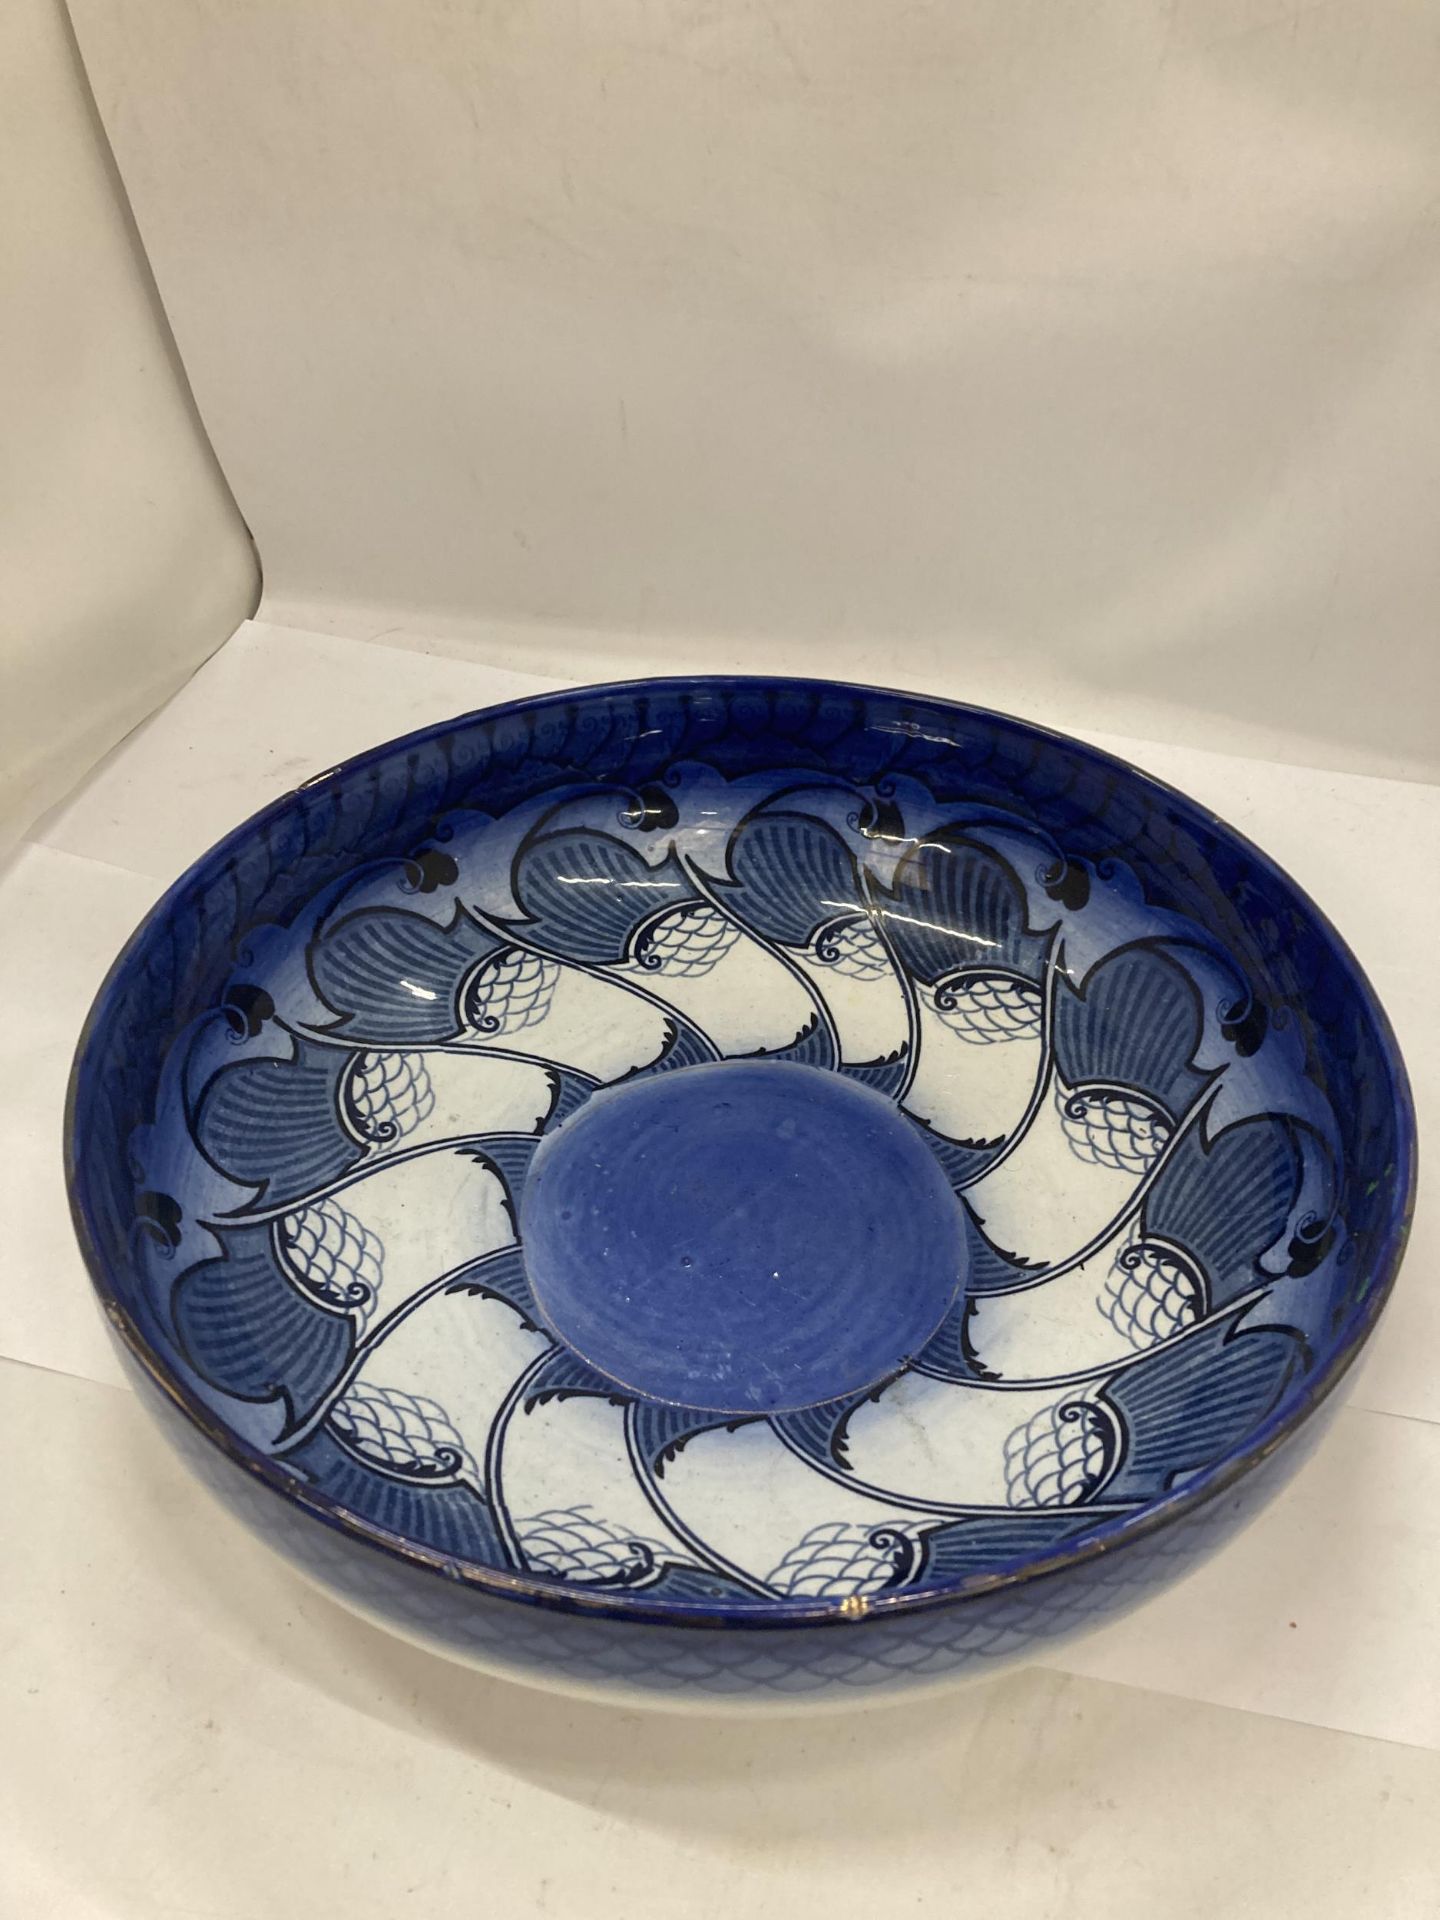 AN ART NOUVEAU ROYAL DOULTON BLUE AND WHITE FRUIT BOWL WITH ARTISTS MONOGRAM TO BASE